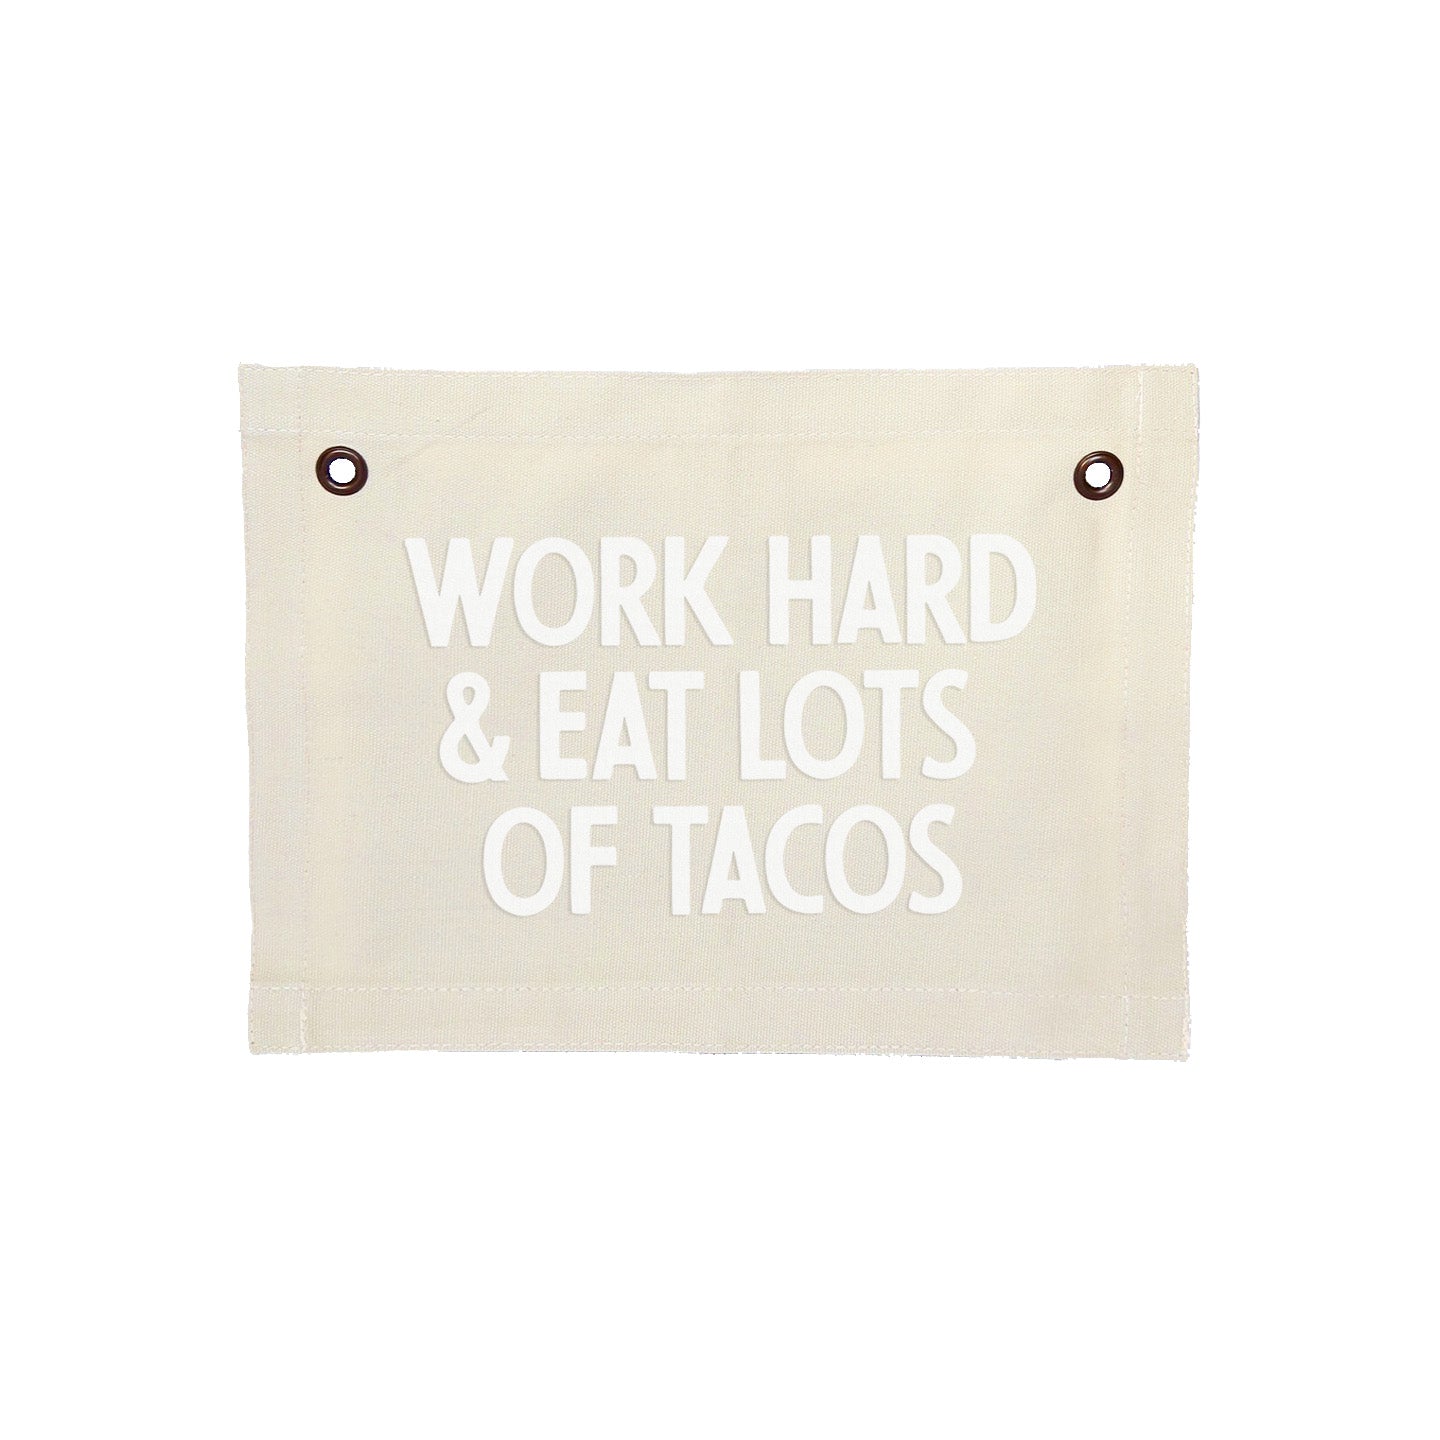 Work Hard & Eat Lots Of Tacos Small Canvas Flag